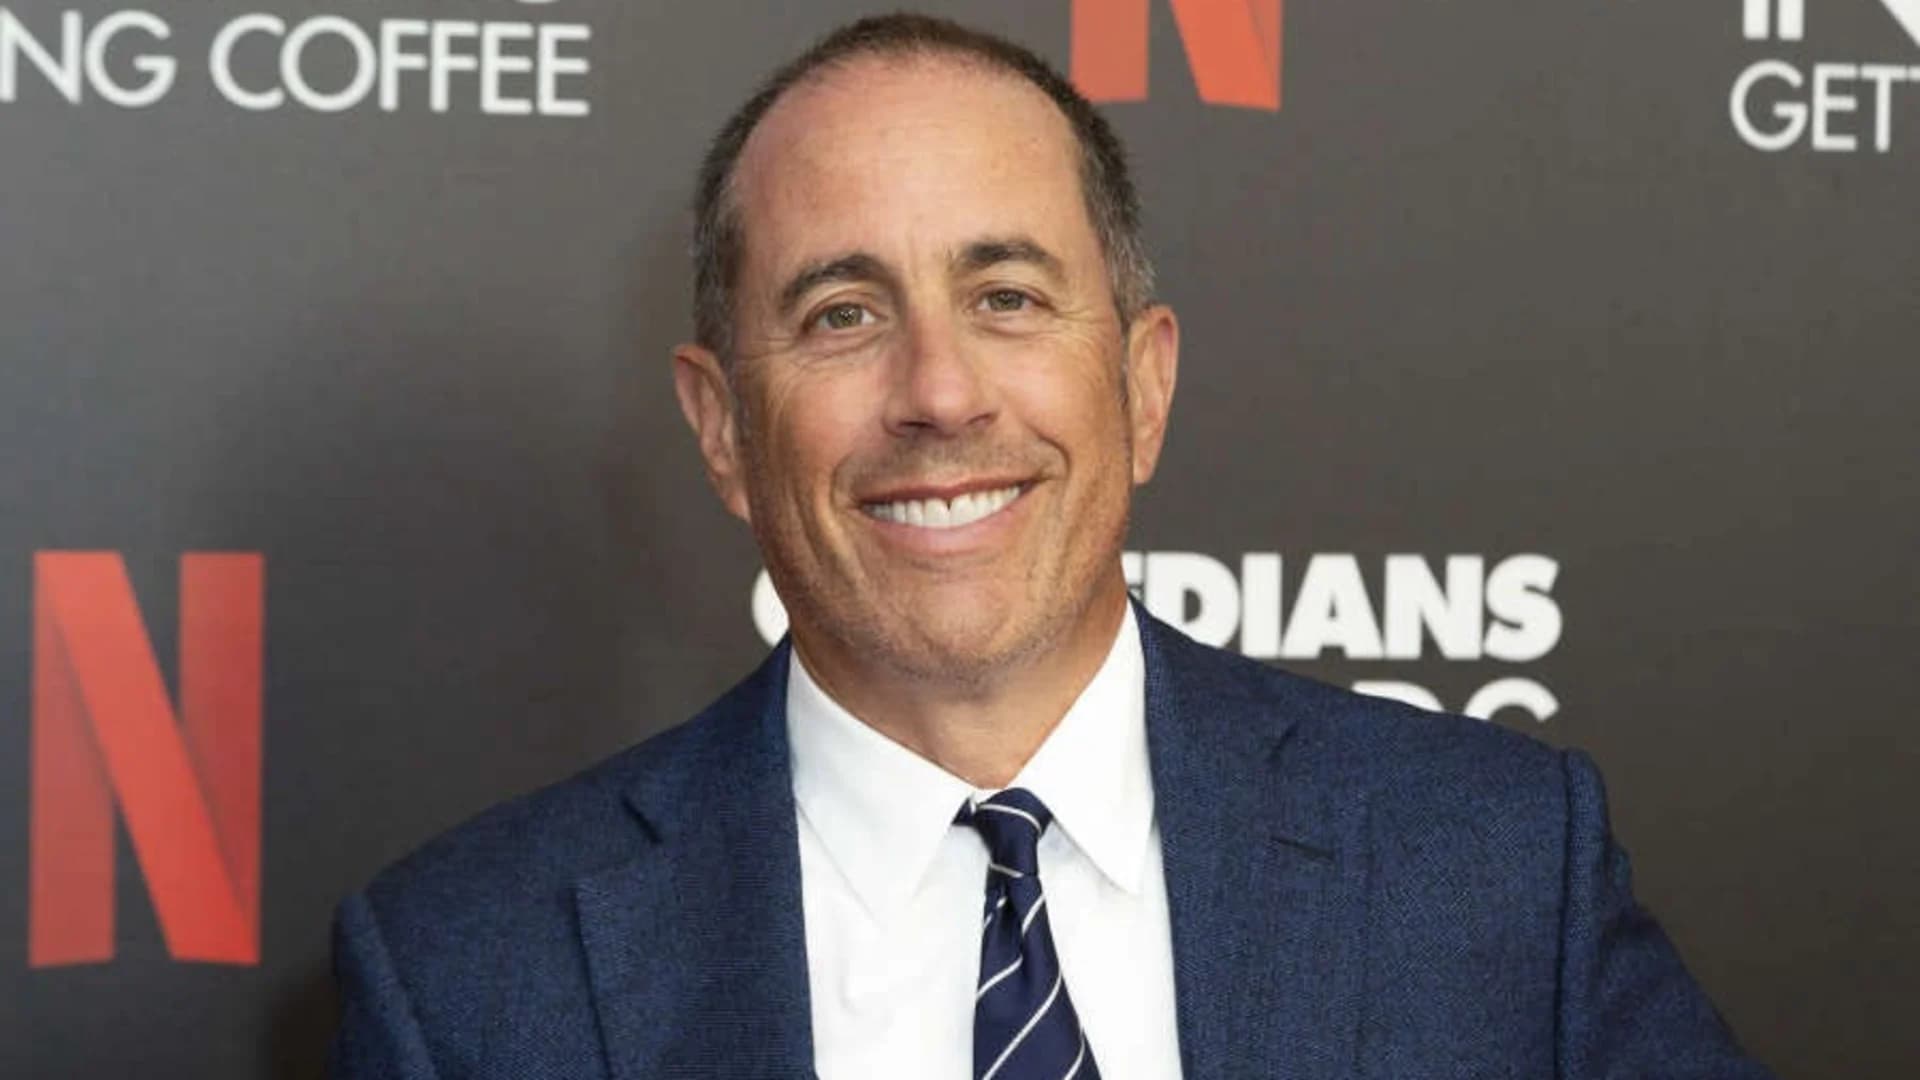 Jerry Seinfeld's New York standup special premieres on Netflix in May